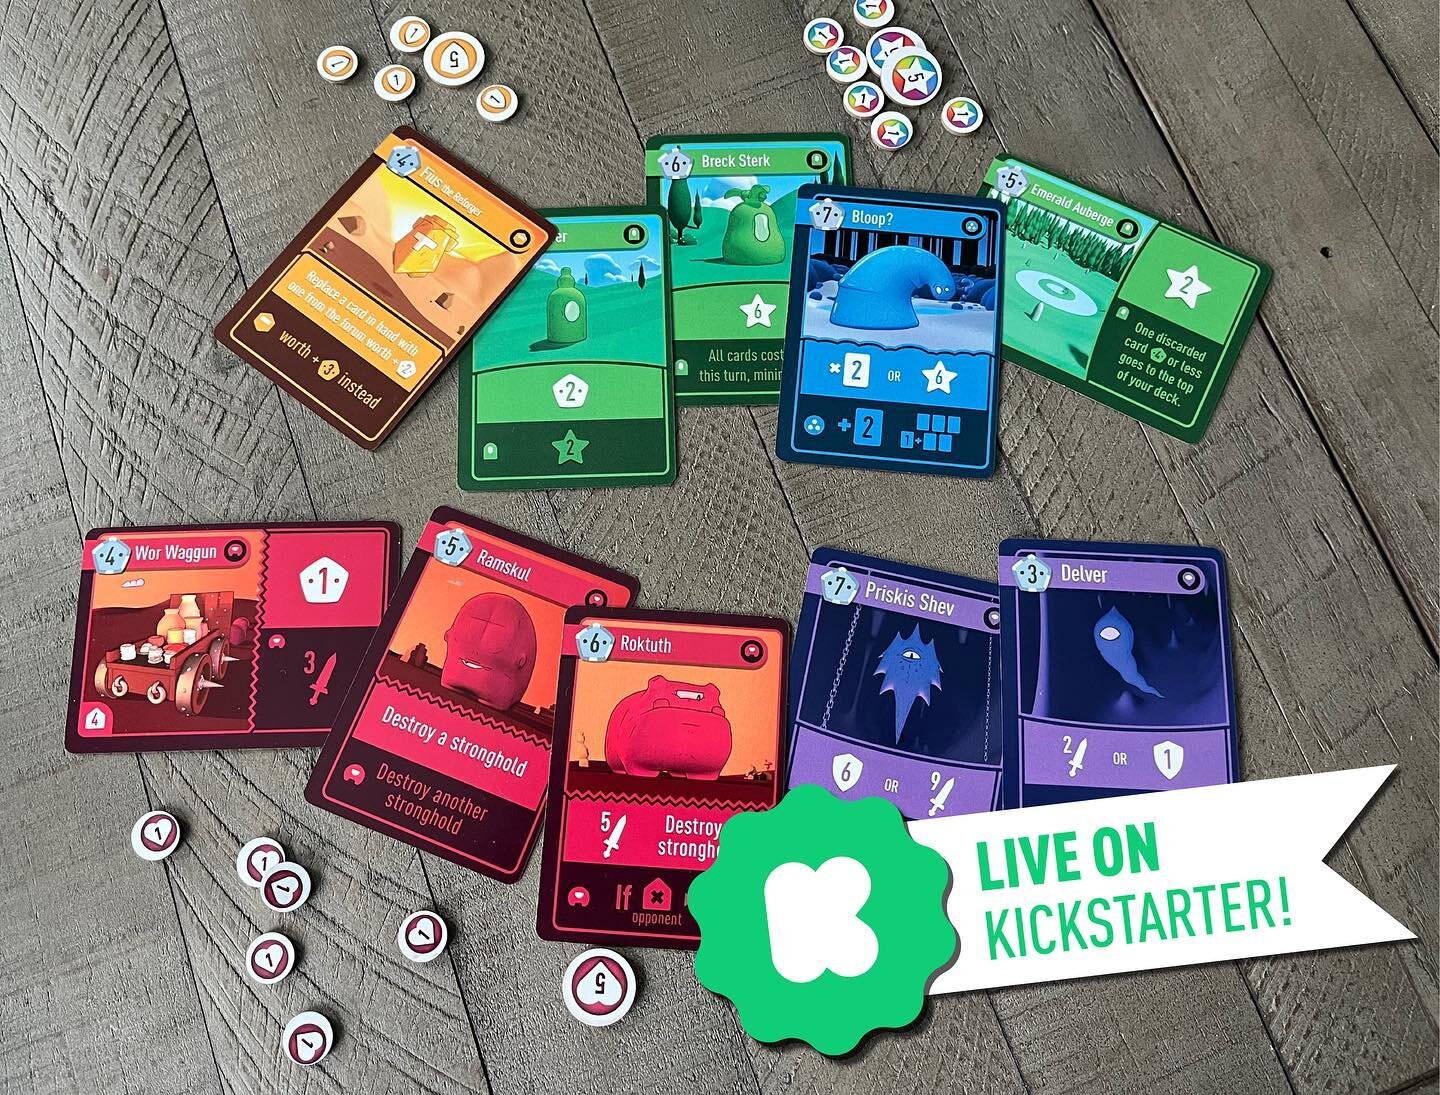 When it comes to board games, do you like direct player-to-player-combat-type games? Or build-your-own-thing-independently-and-gather-points-type games? In Unition, you can do both. Dual victory conditions allow all players to choose an aggressive or